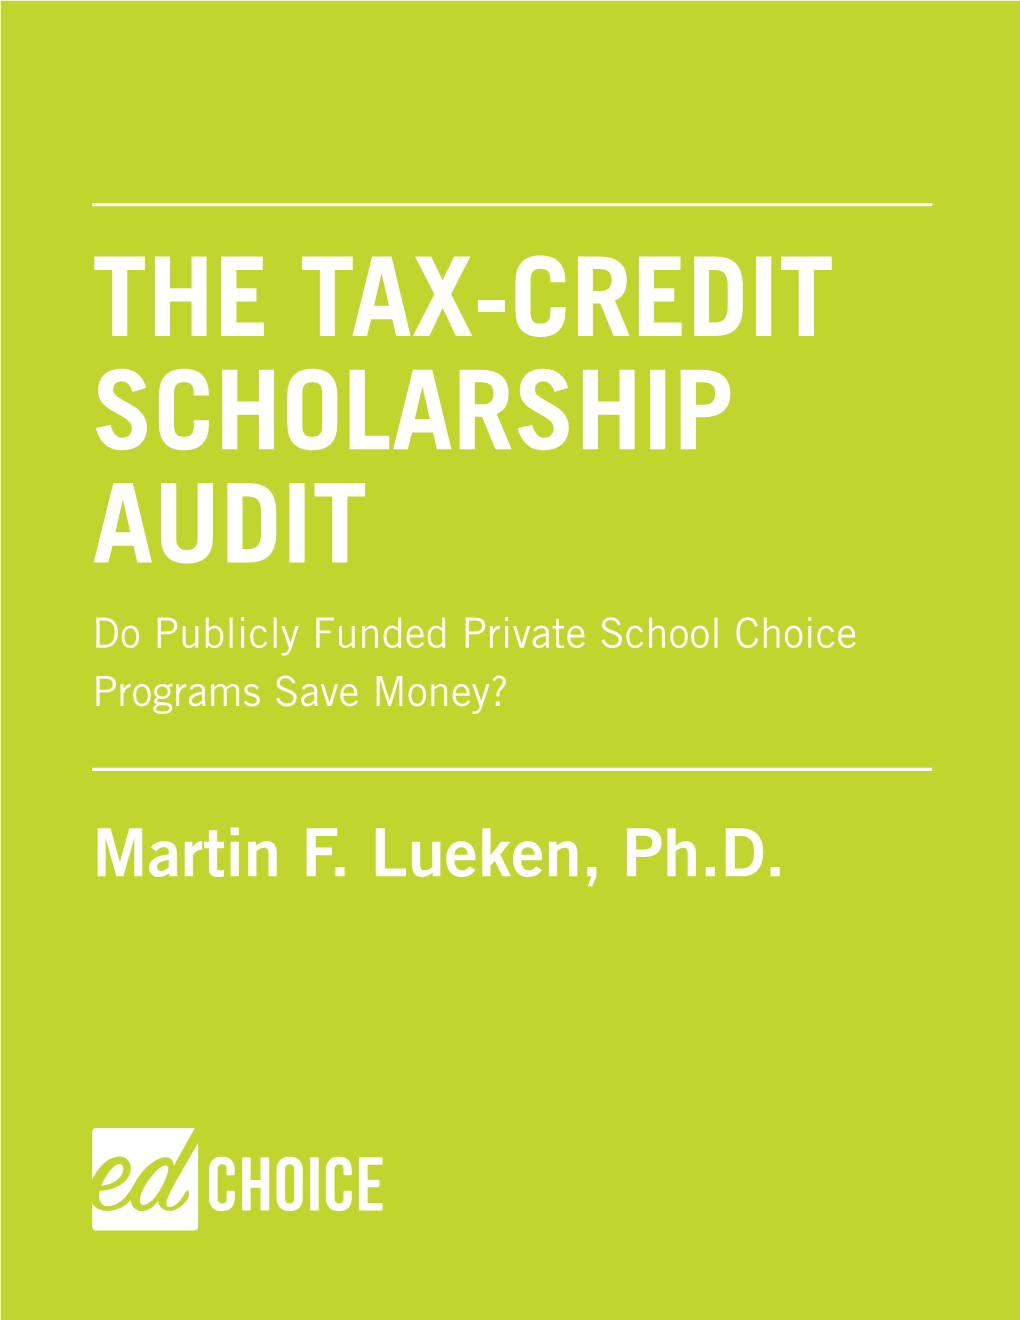 THE TAX-CREDIT SCHOLARSHIP AUDIT Do Publicly Funded Private School Choice Programs Save Money?